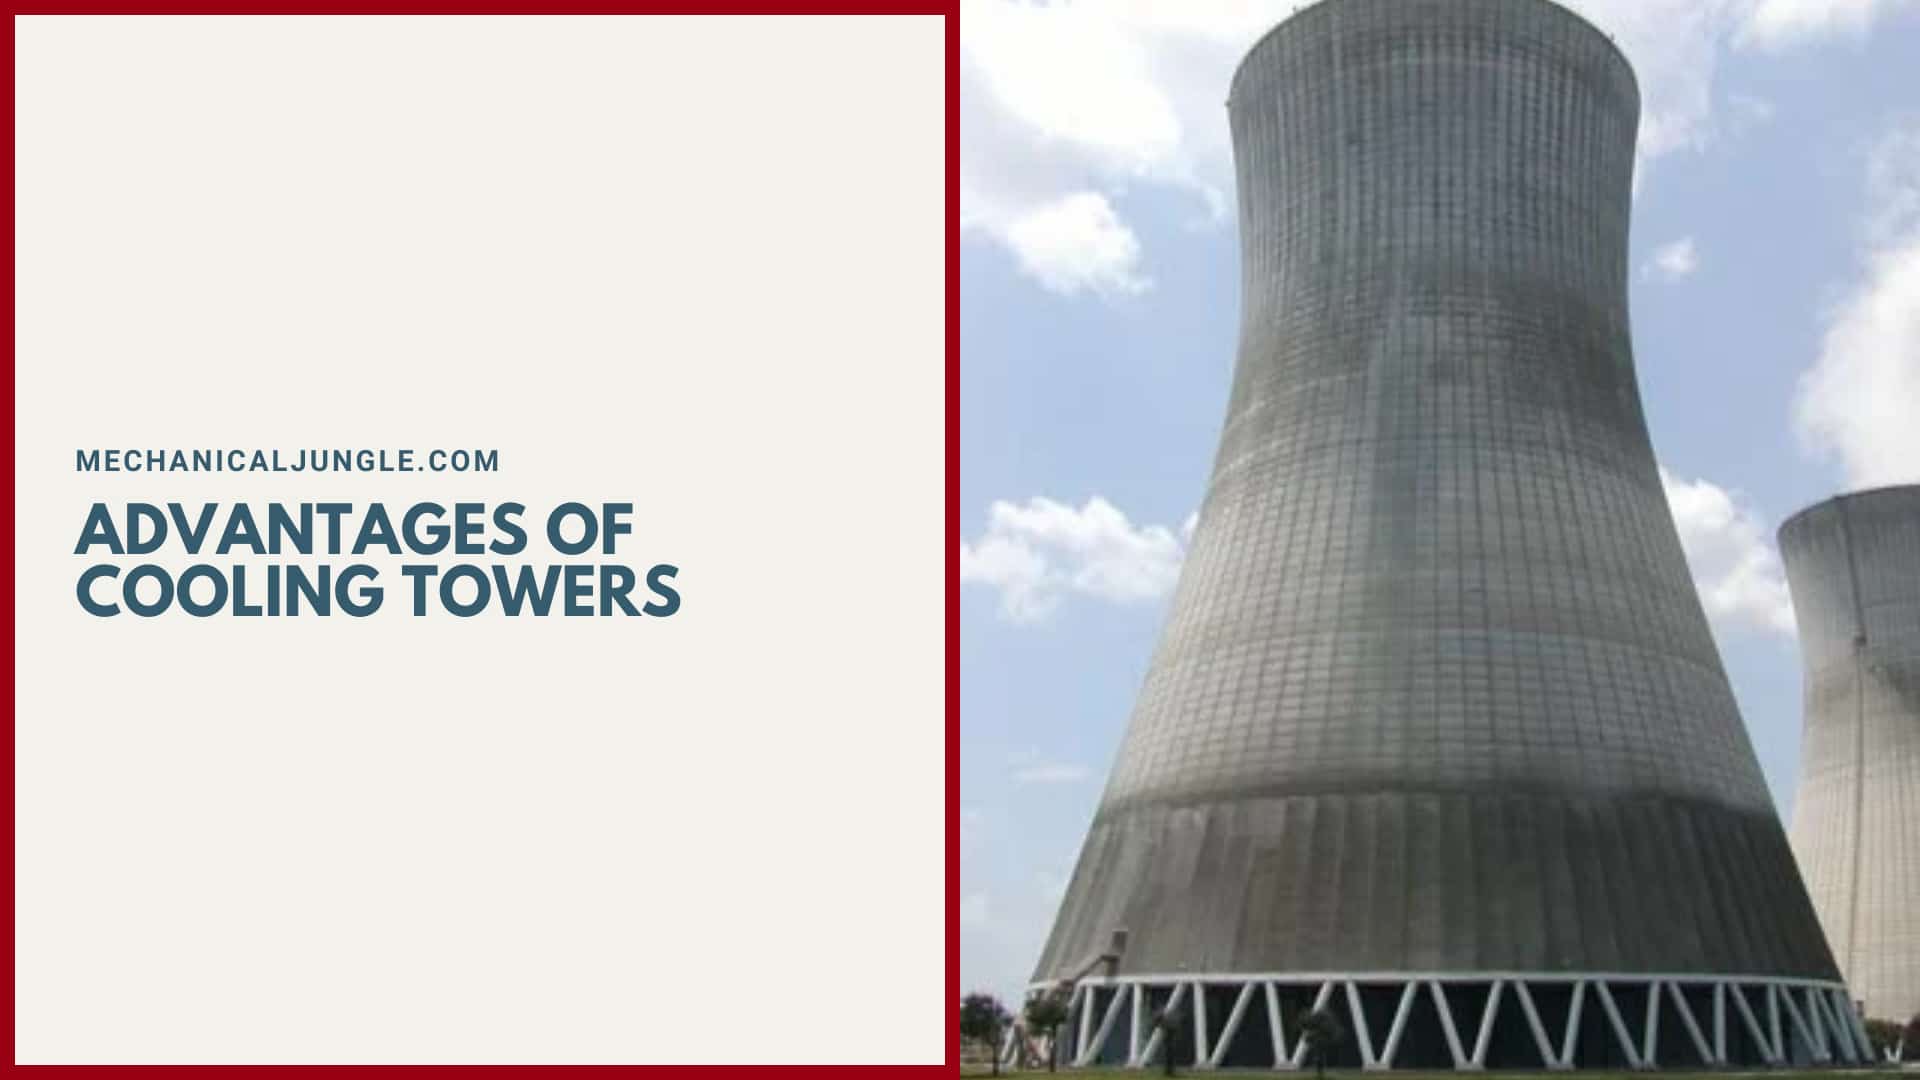 Advantages of Cooling Towers